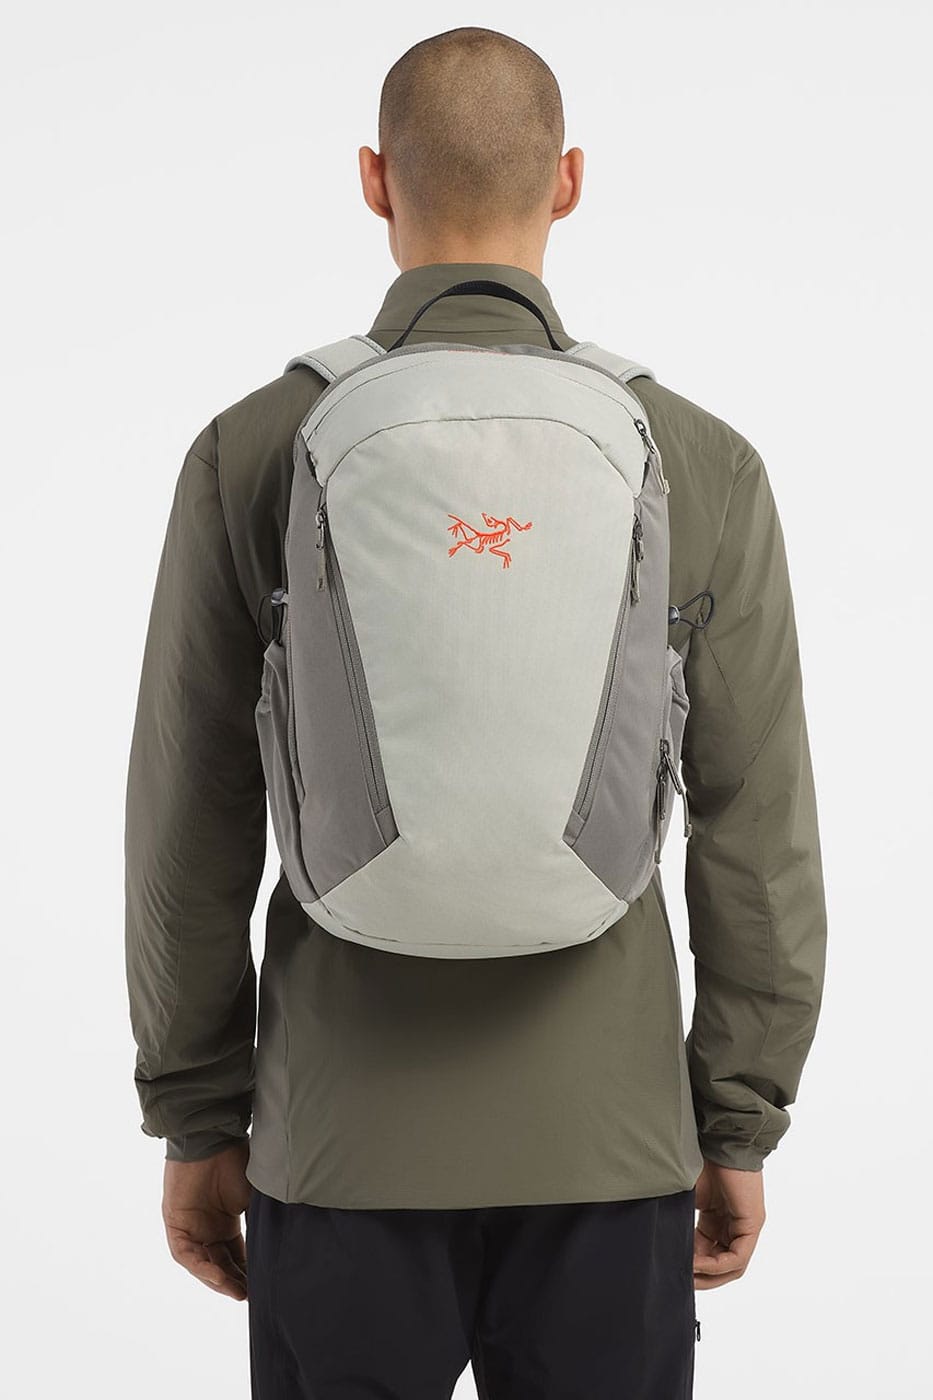 Arc'teryx Releases Its First Updated Version of Its 